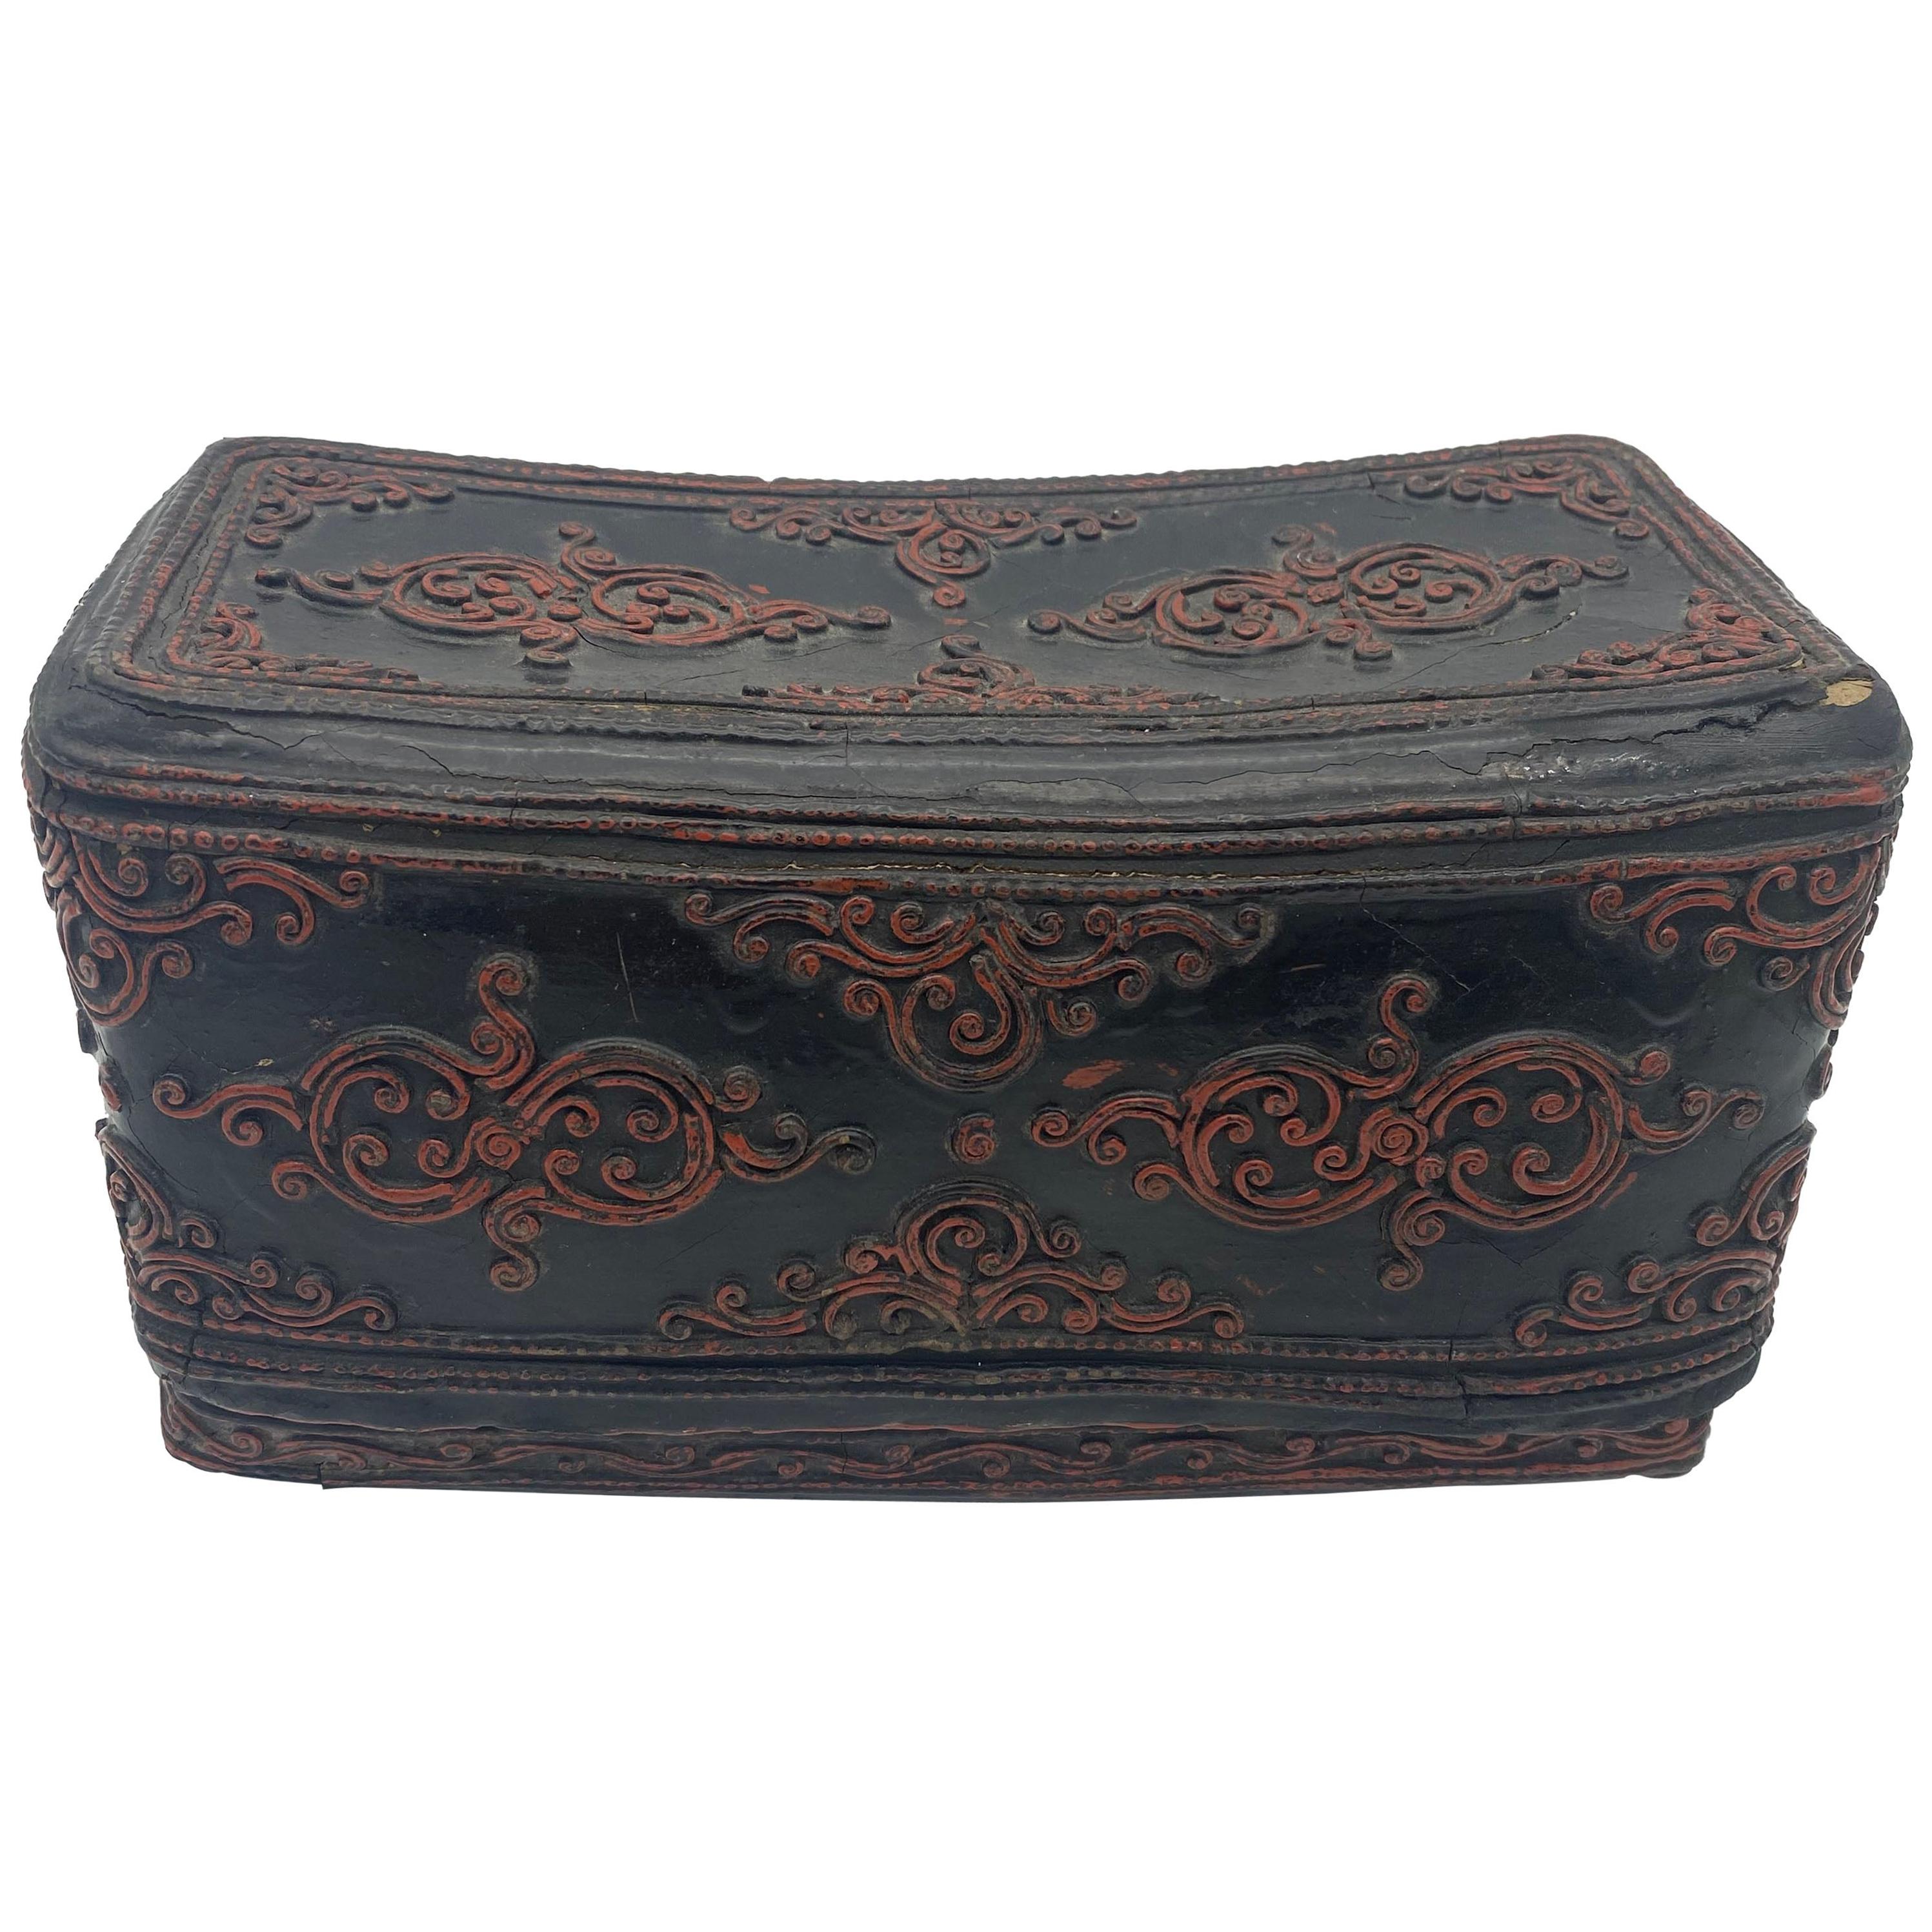 18th Century Burmese Rakhine State Lacquer Bamboo Pillow Box For Sale